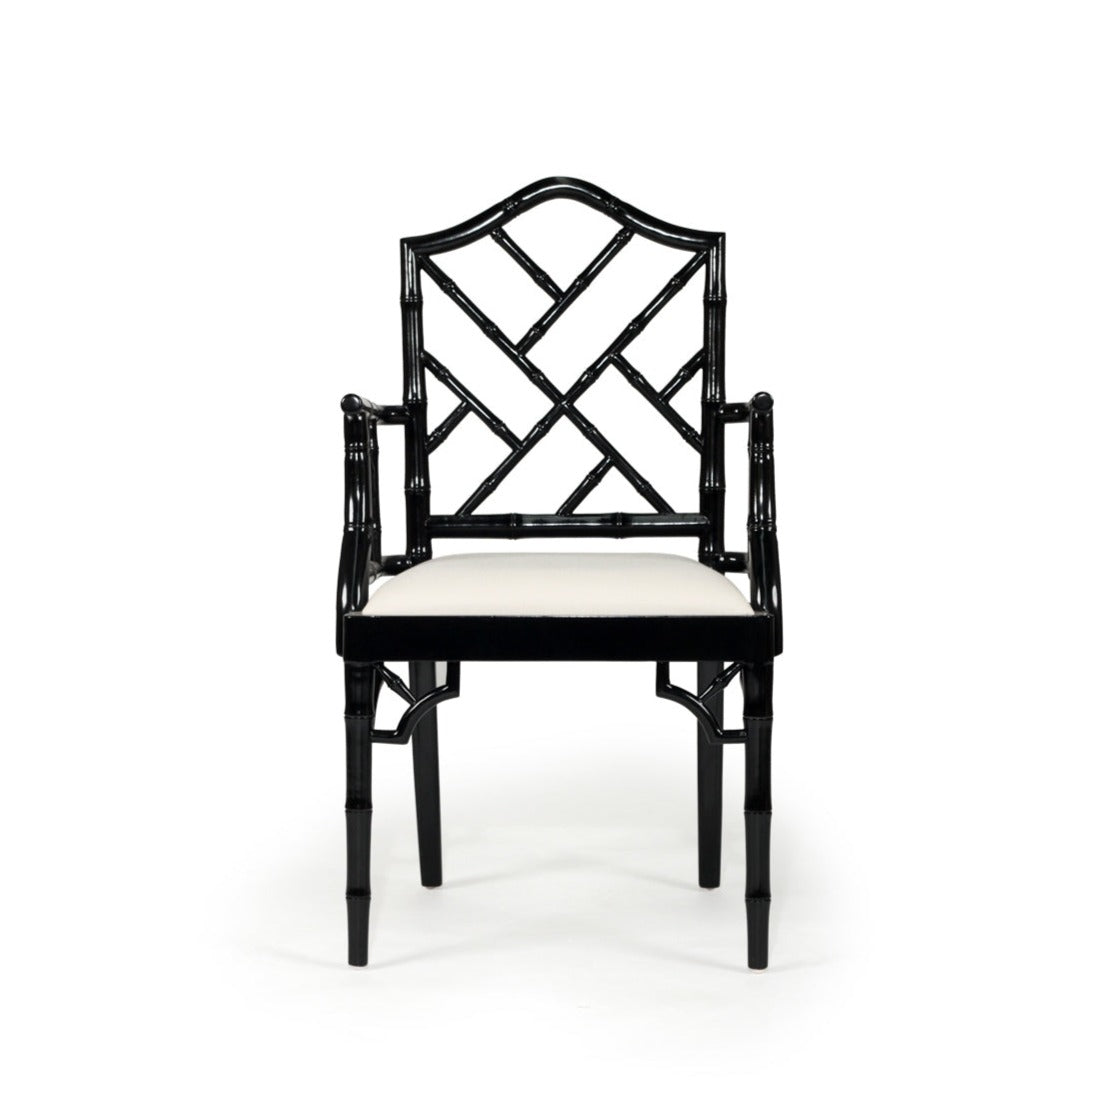 Paloma Chippendale Wooden Armchair – Black - Notbrand